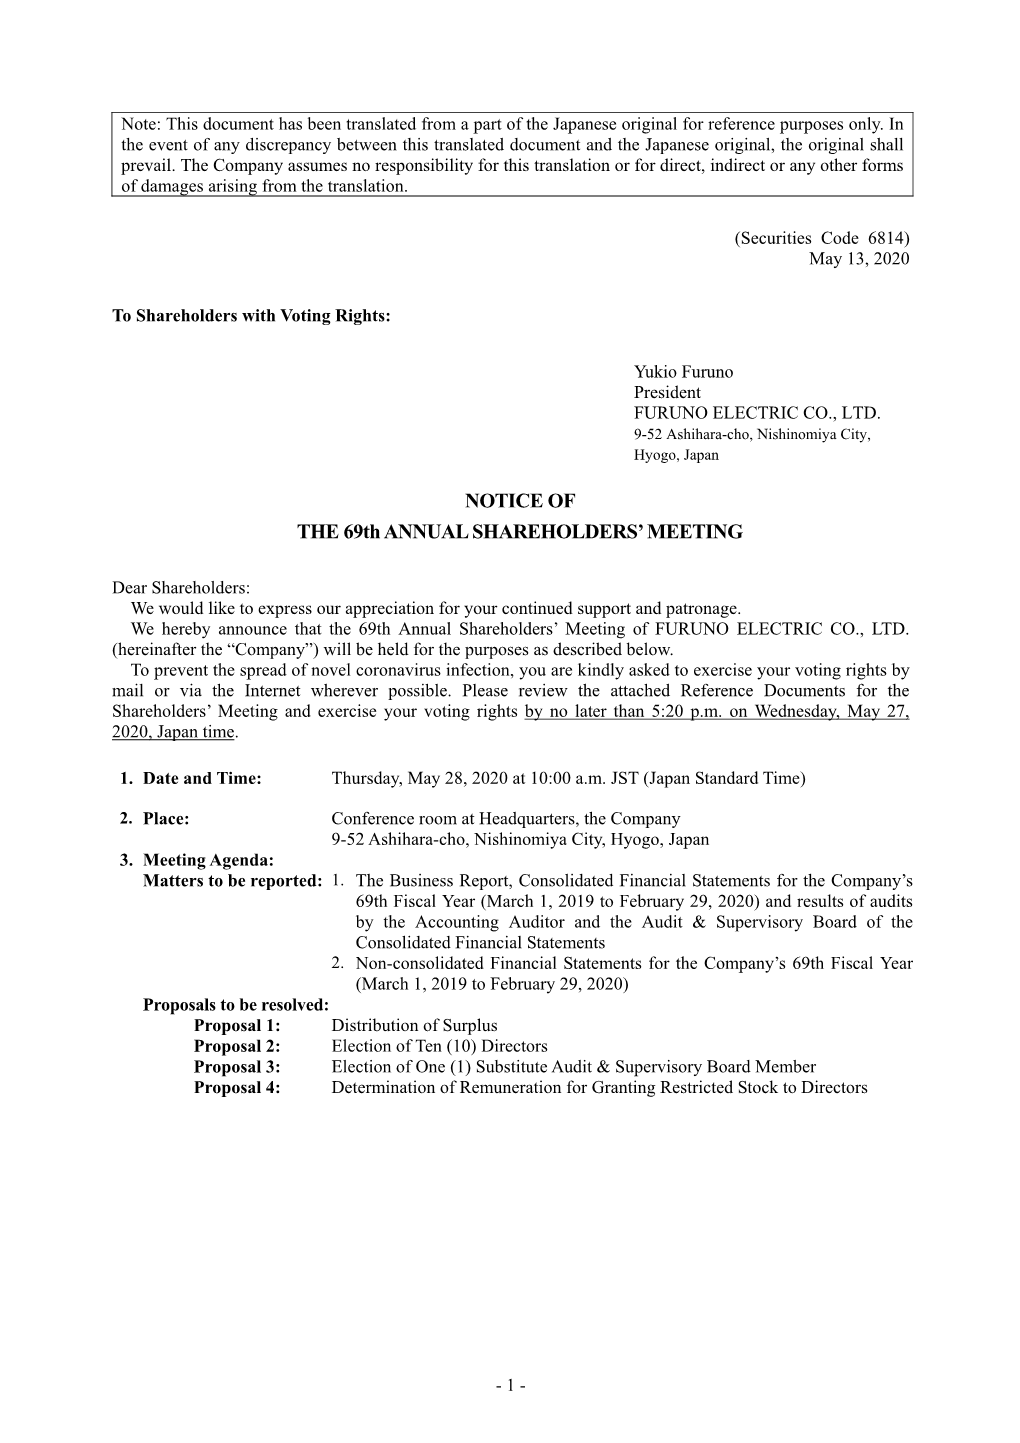 NOTICE of the 69Th ANNUAL SHAREHOLDERS' MEETING